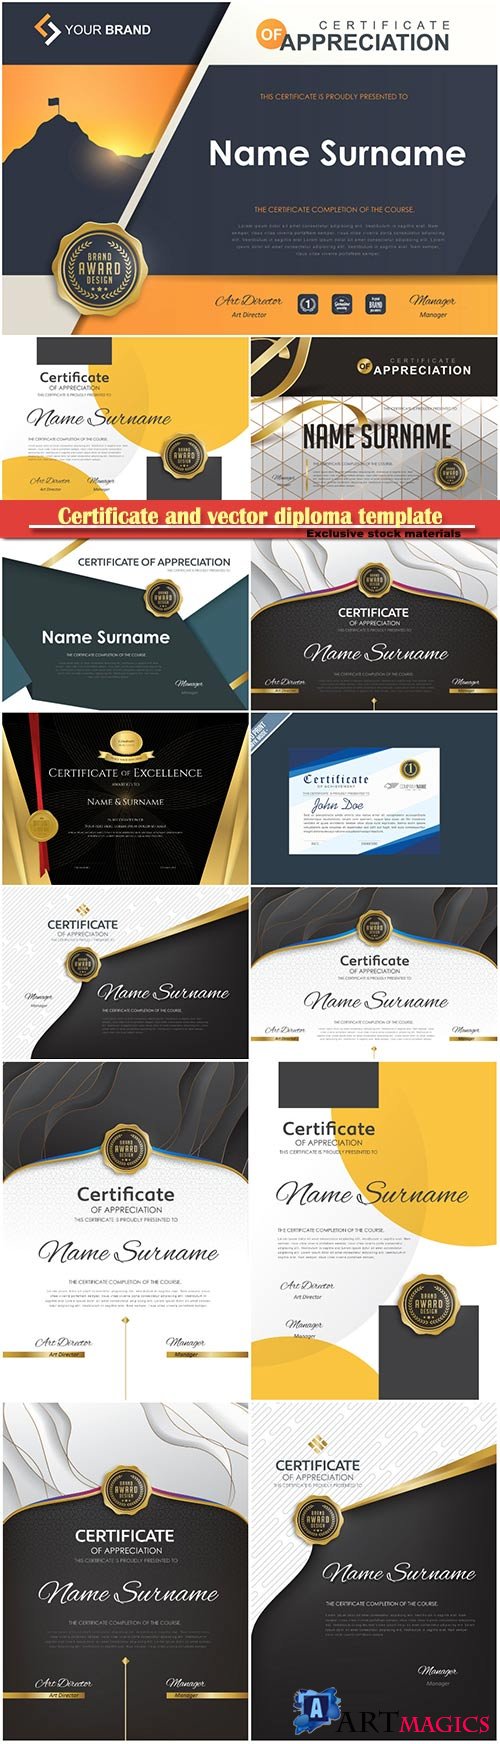 Certificate and vector diploma template design set